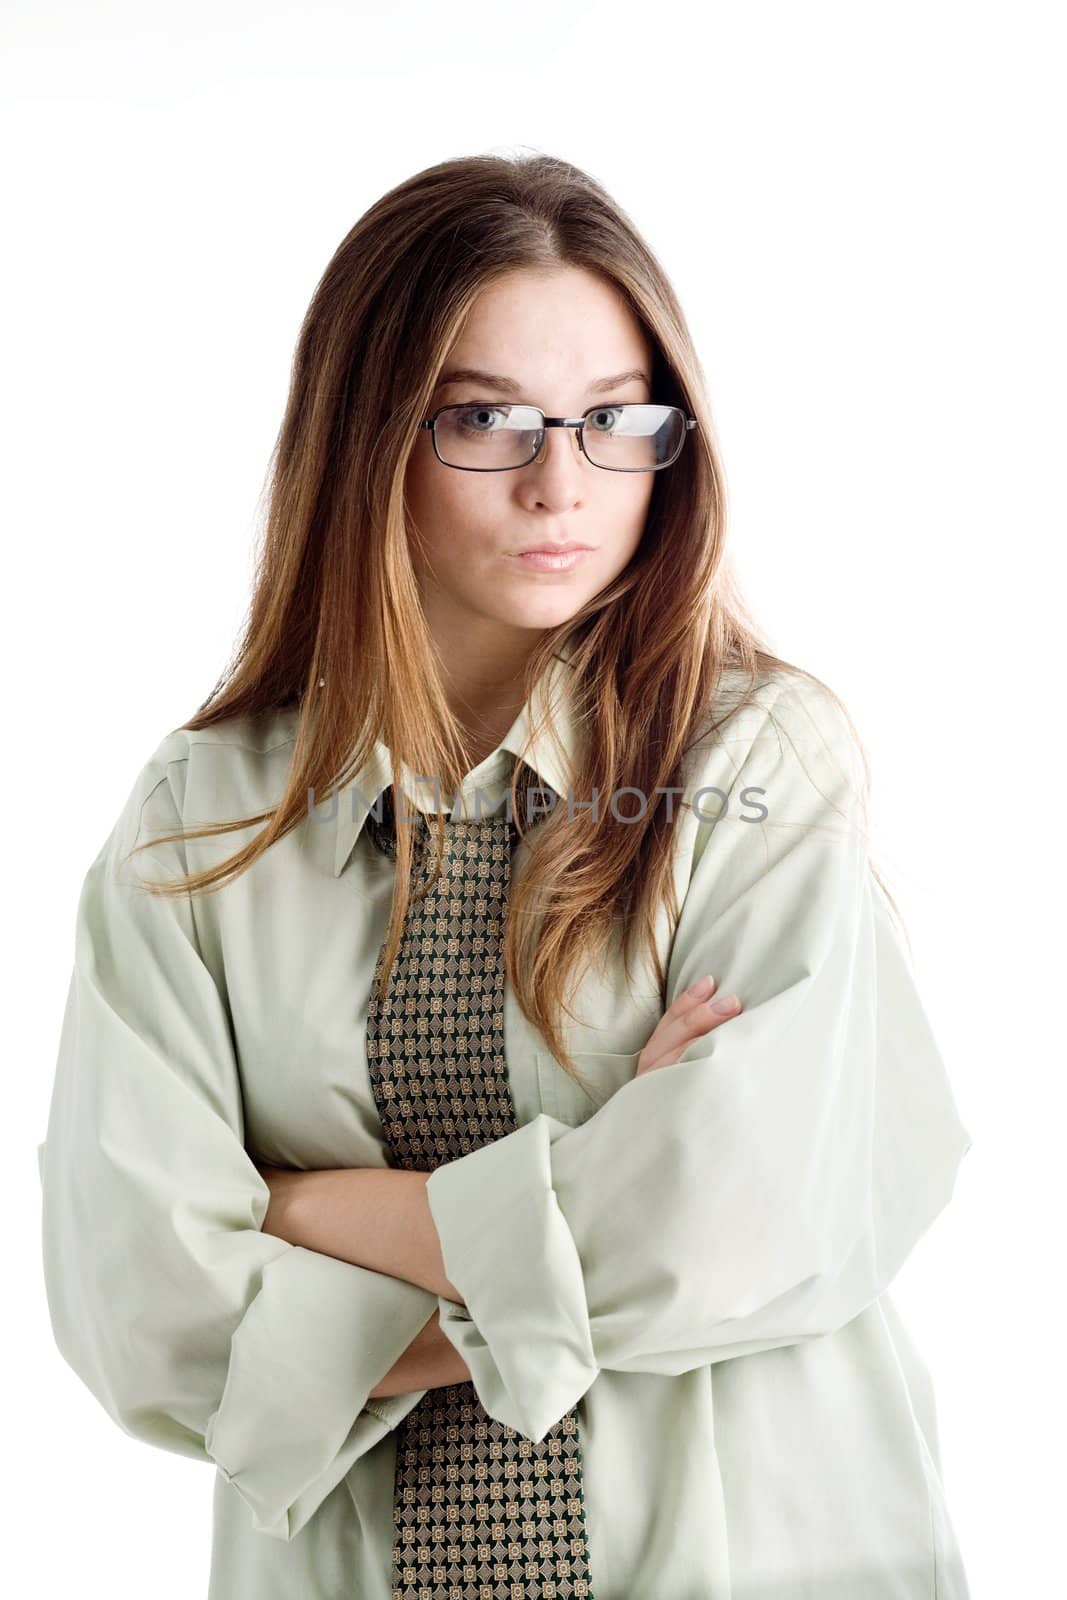 An image of a nice young girl in glasses